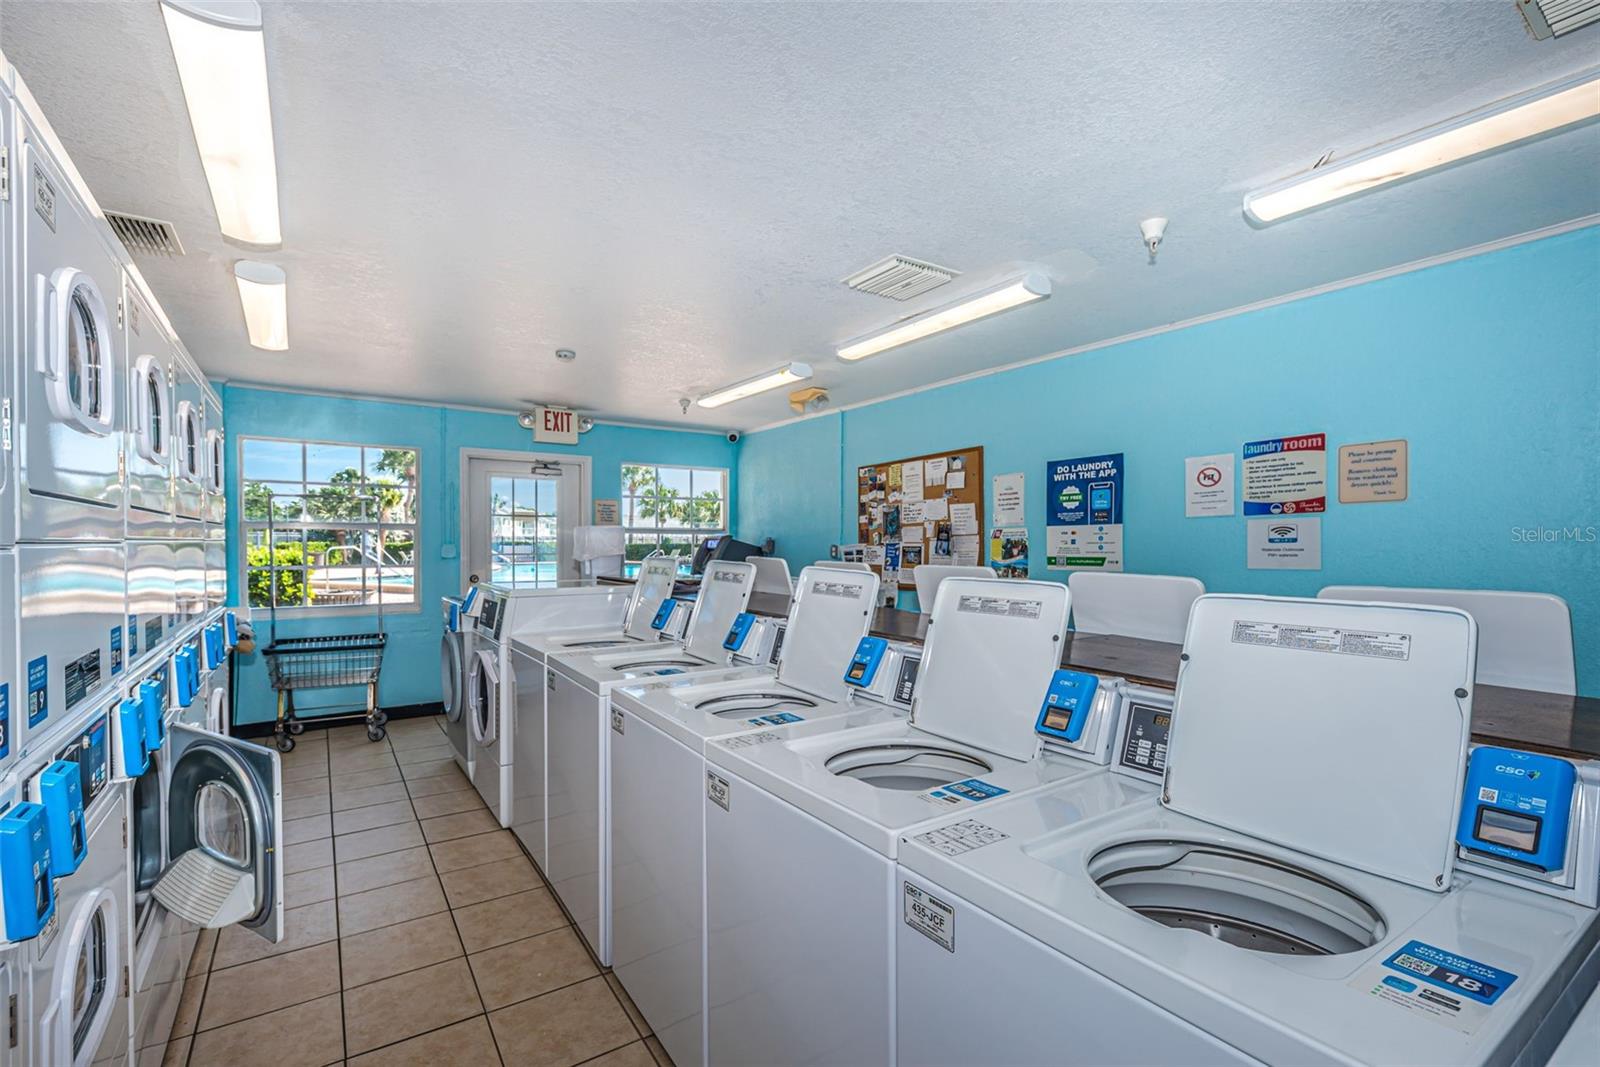 Several laundry machines, including large 1's for comforters